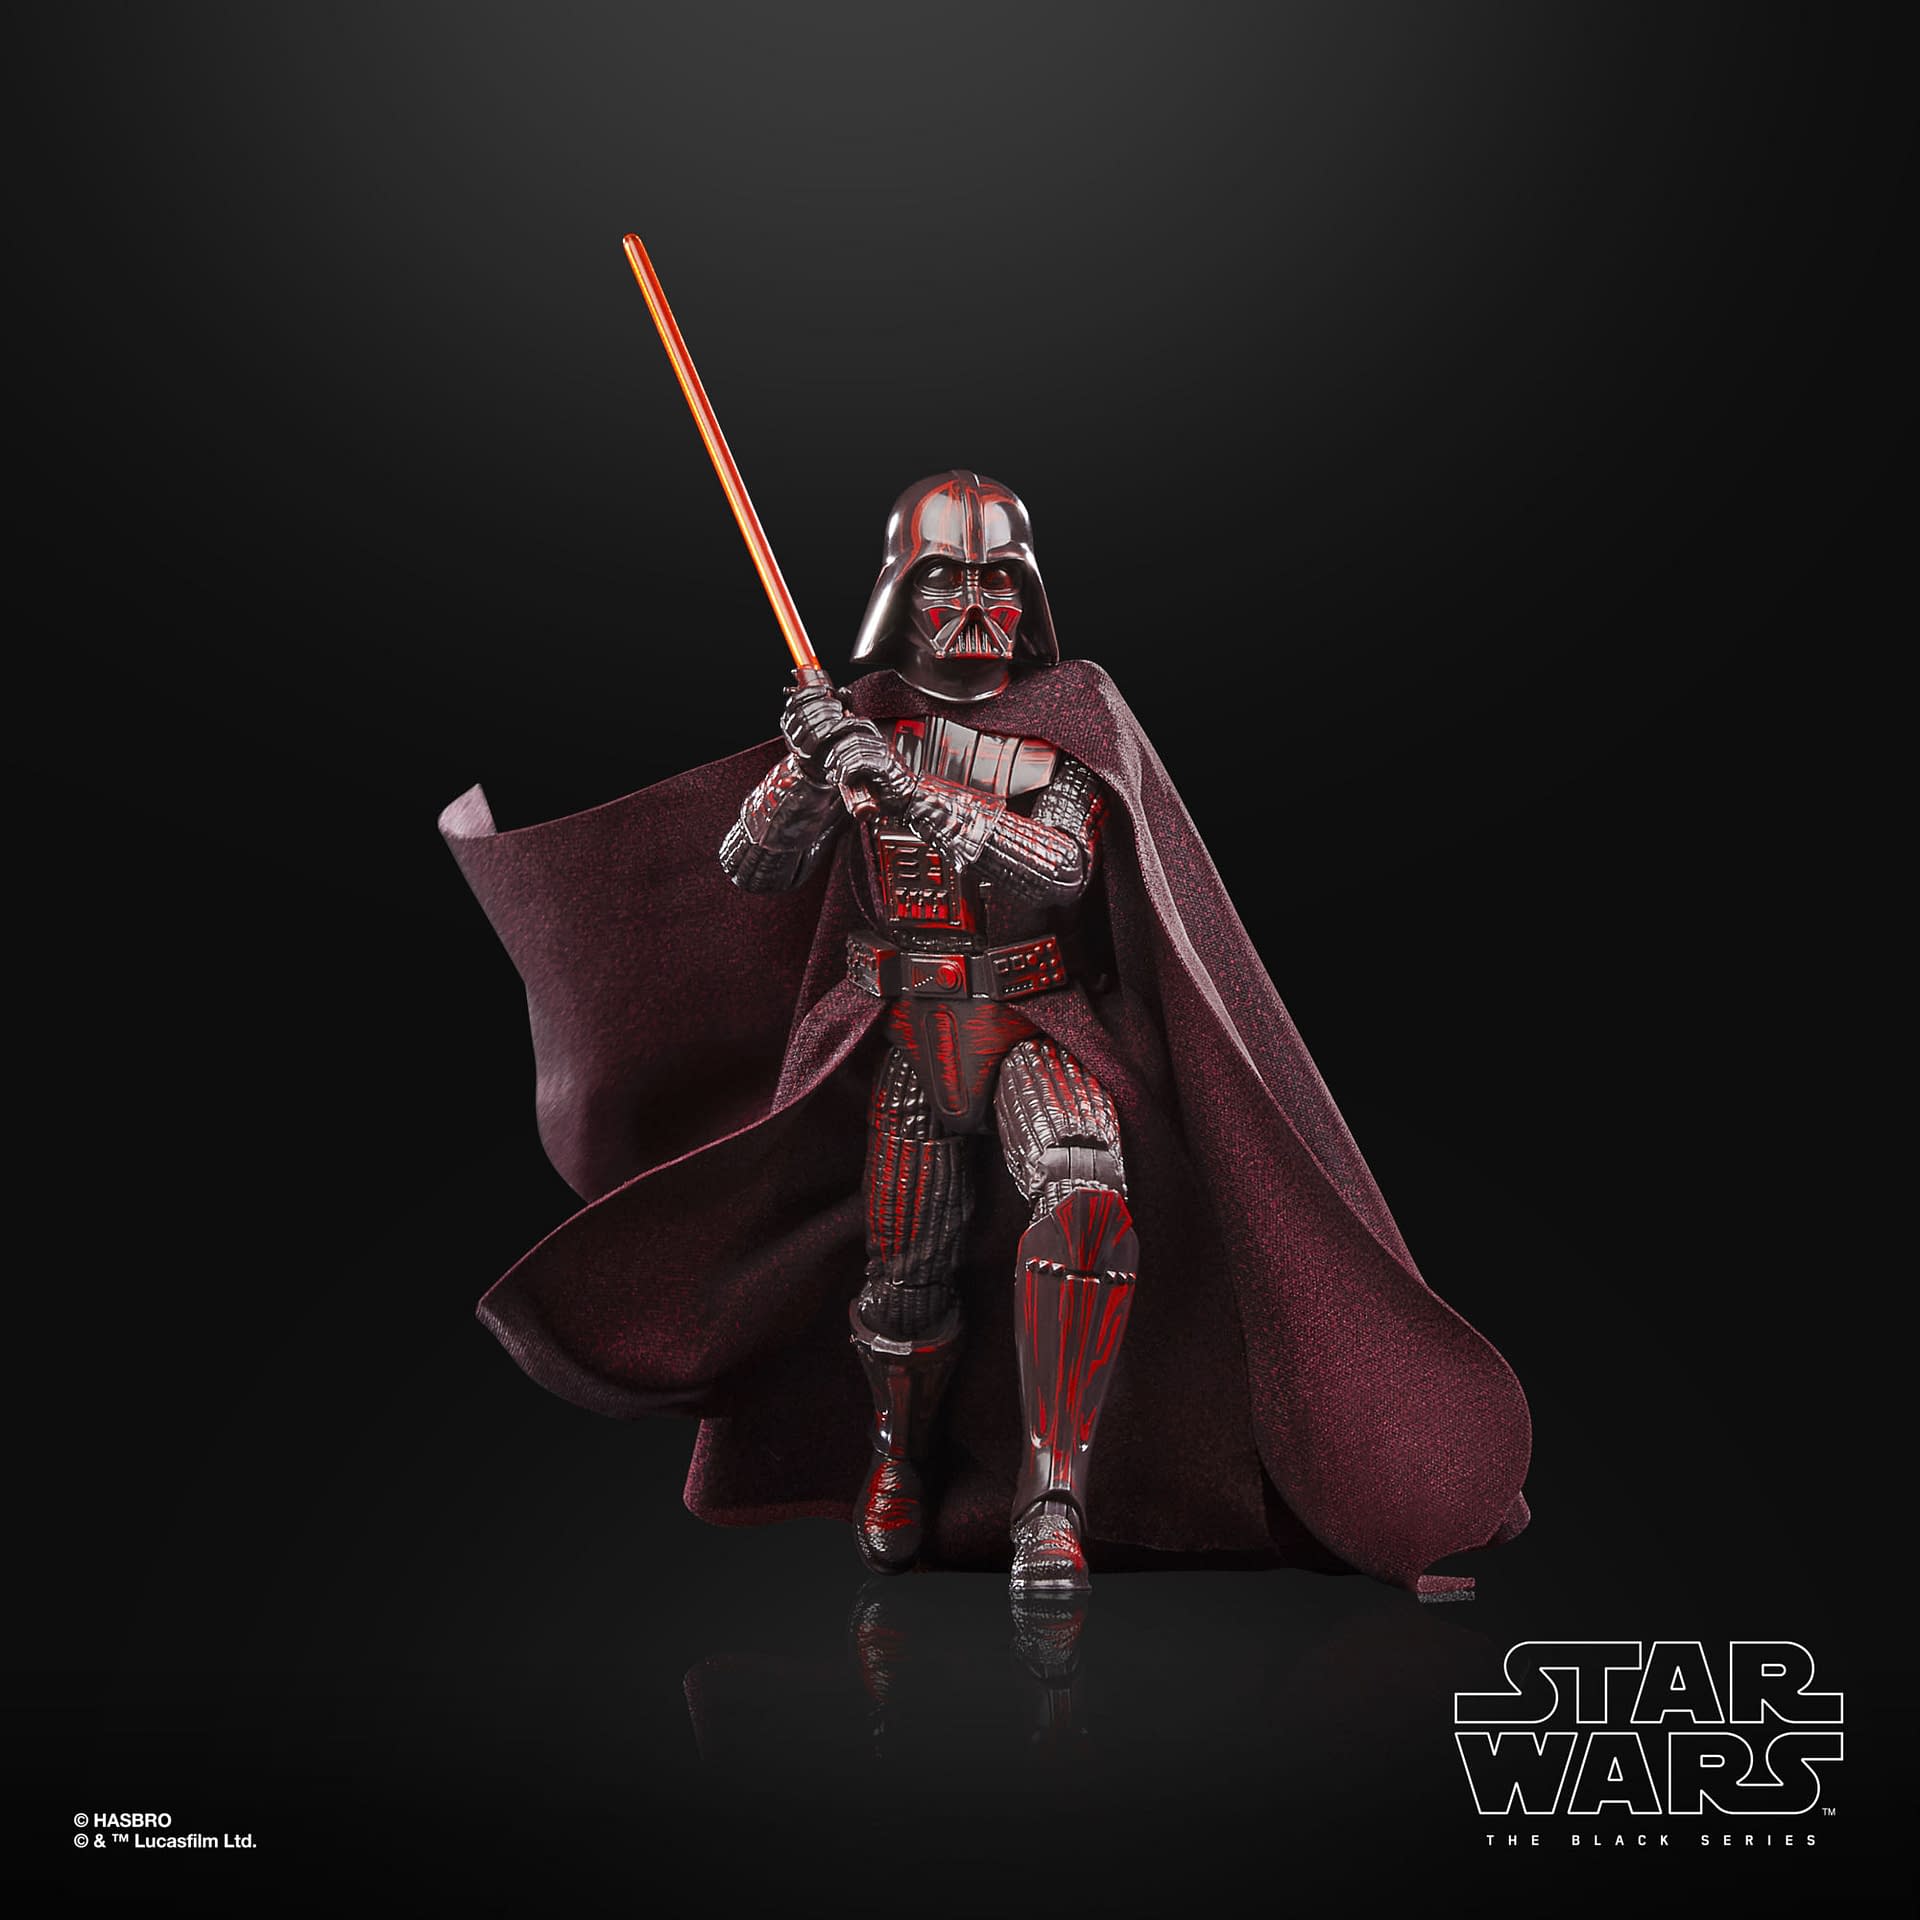 Star Wars Celebration Exclusive Darth Vader Revealed from Hasbro 